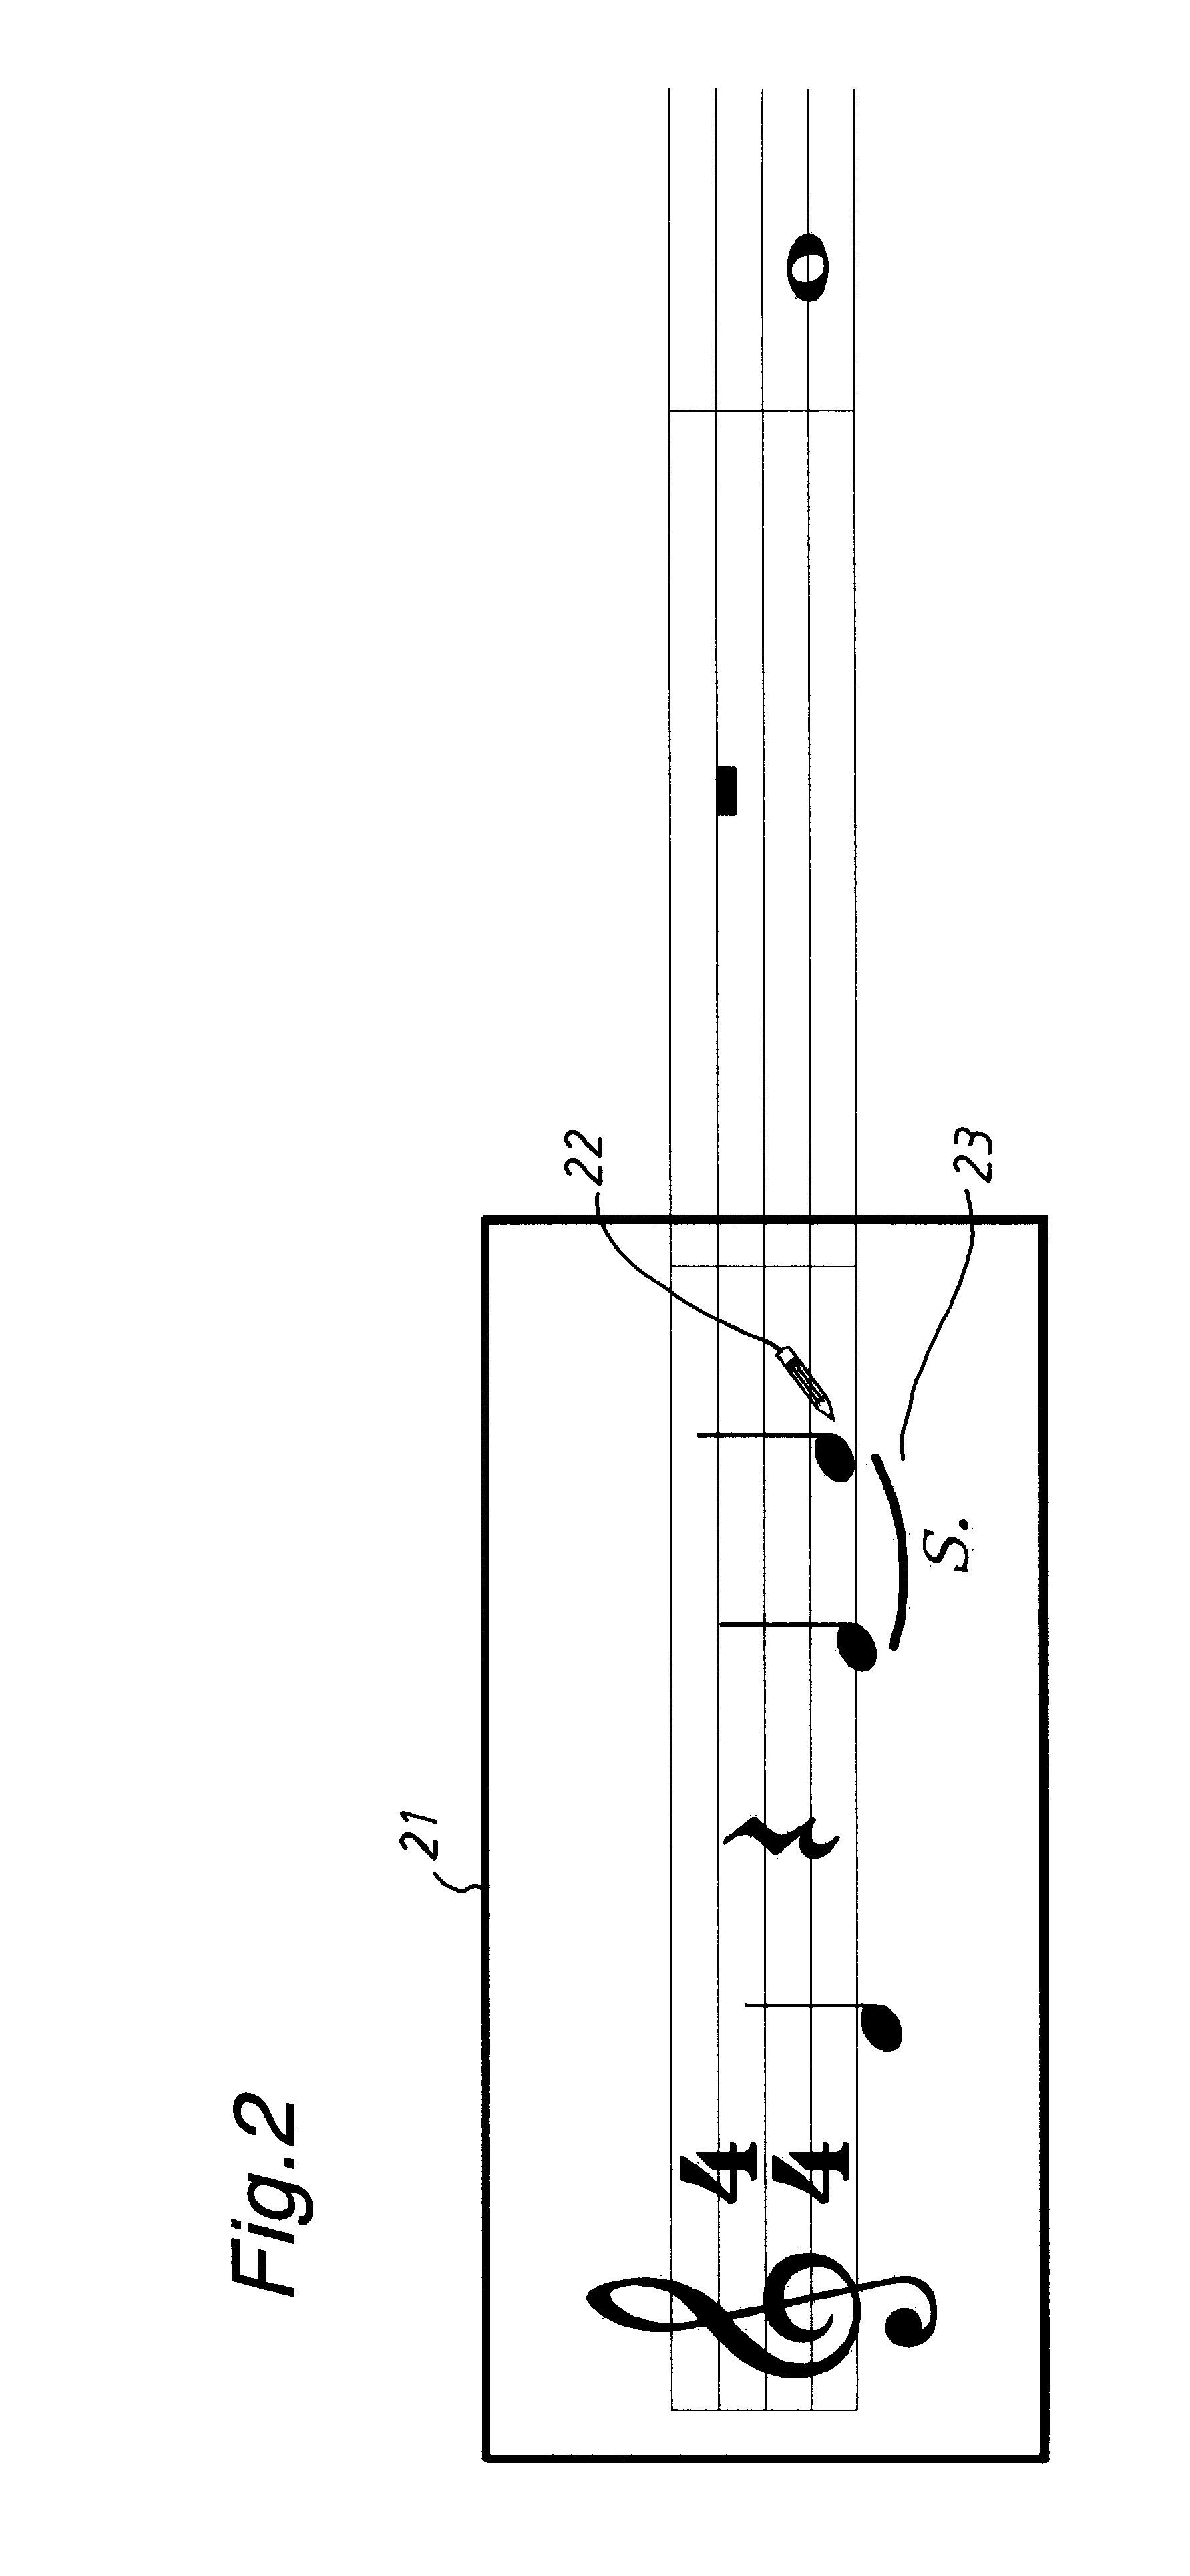 Music score display apparatus with controlled exhibit of connective sign